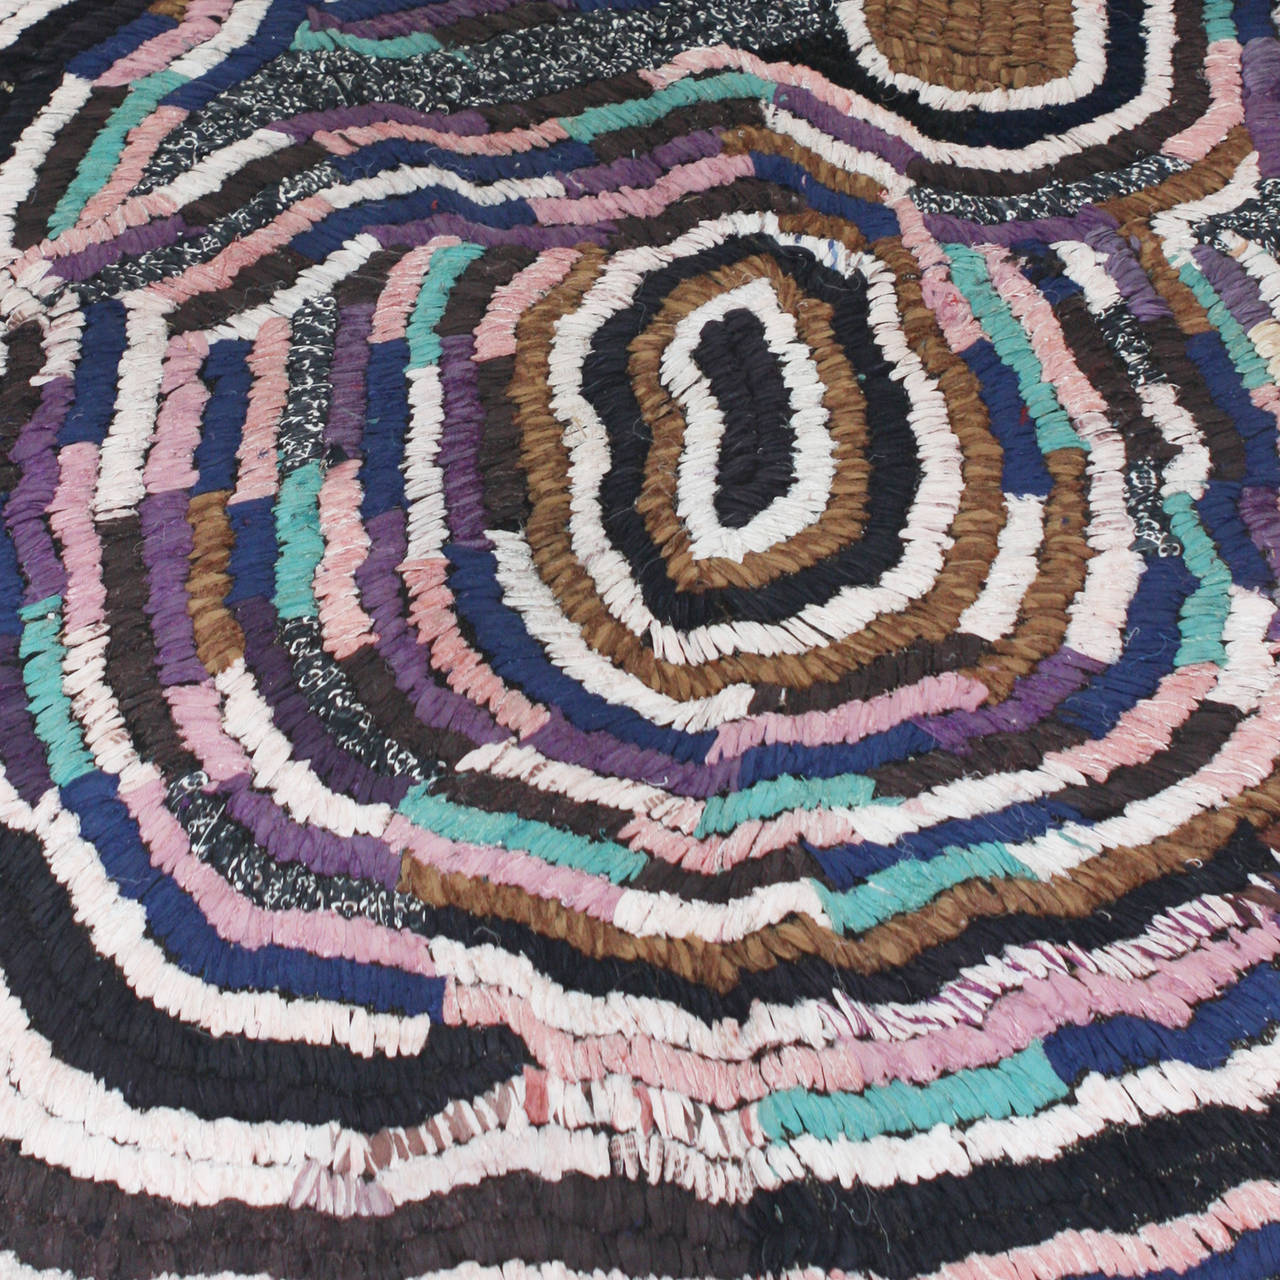 Contemporary Moroccan handwoven rug utilizing cotton remnants in a loop technique. Highly unique and original organic pattern, very painterly. Dominant colors are lavender, brown, cream, turquoise, pale pink and black.